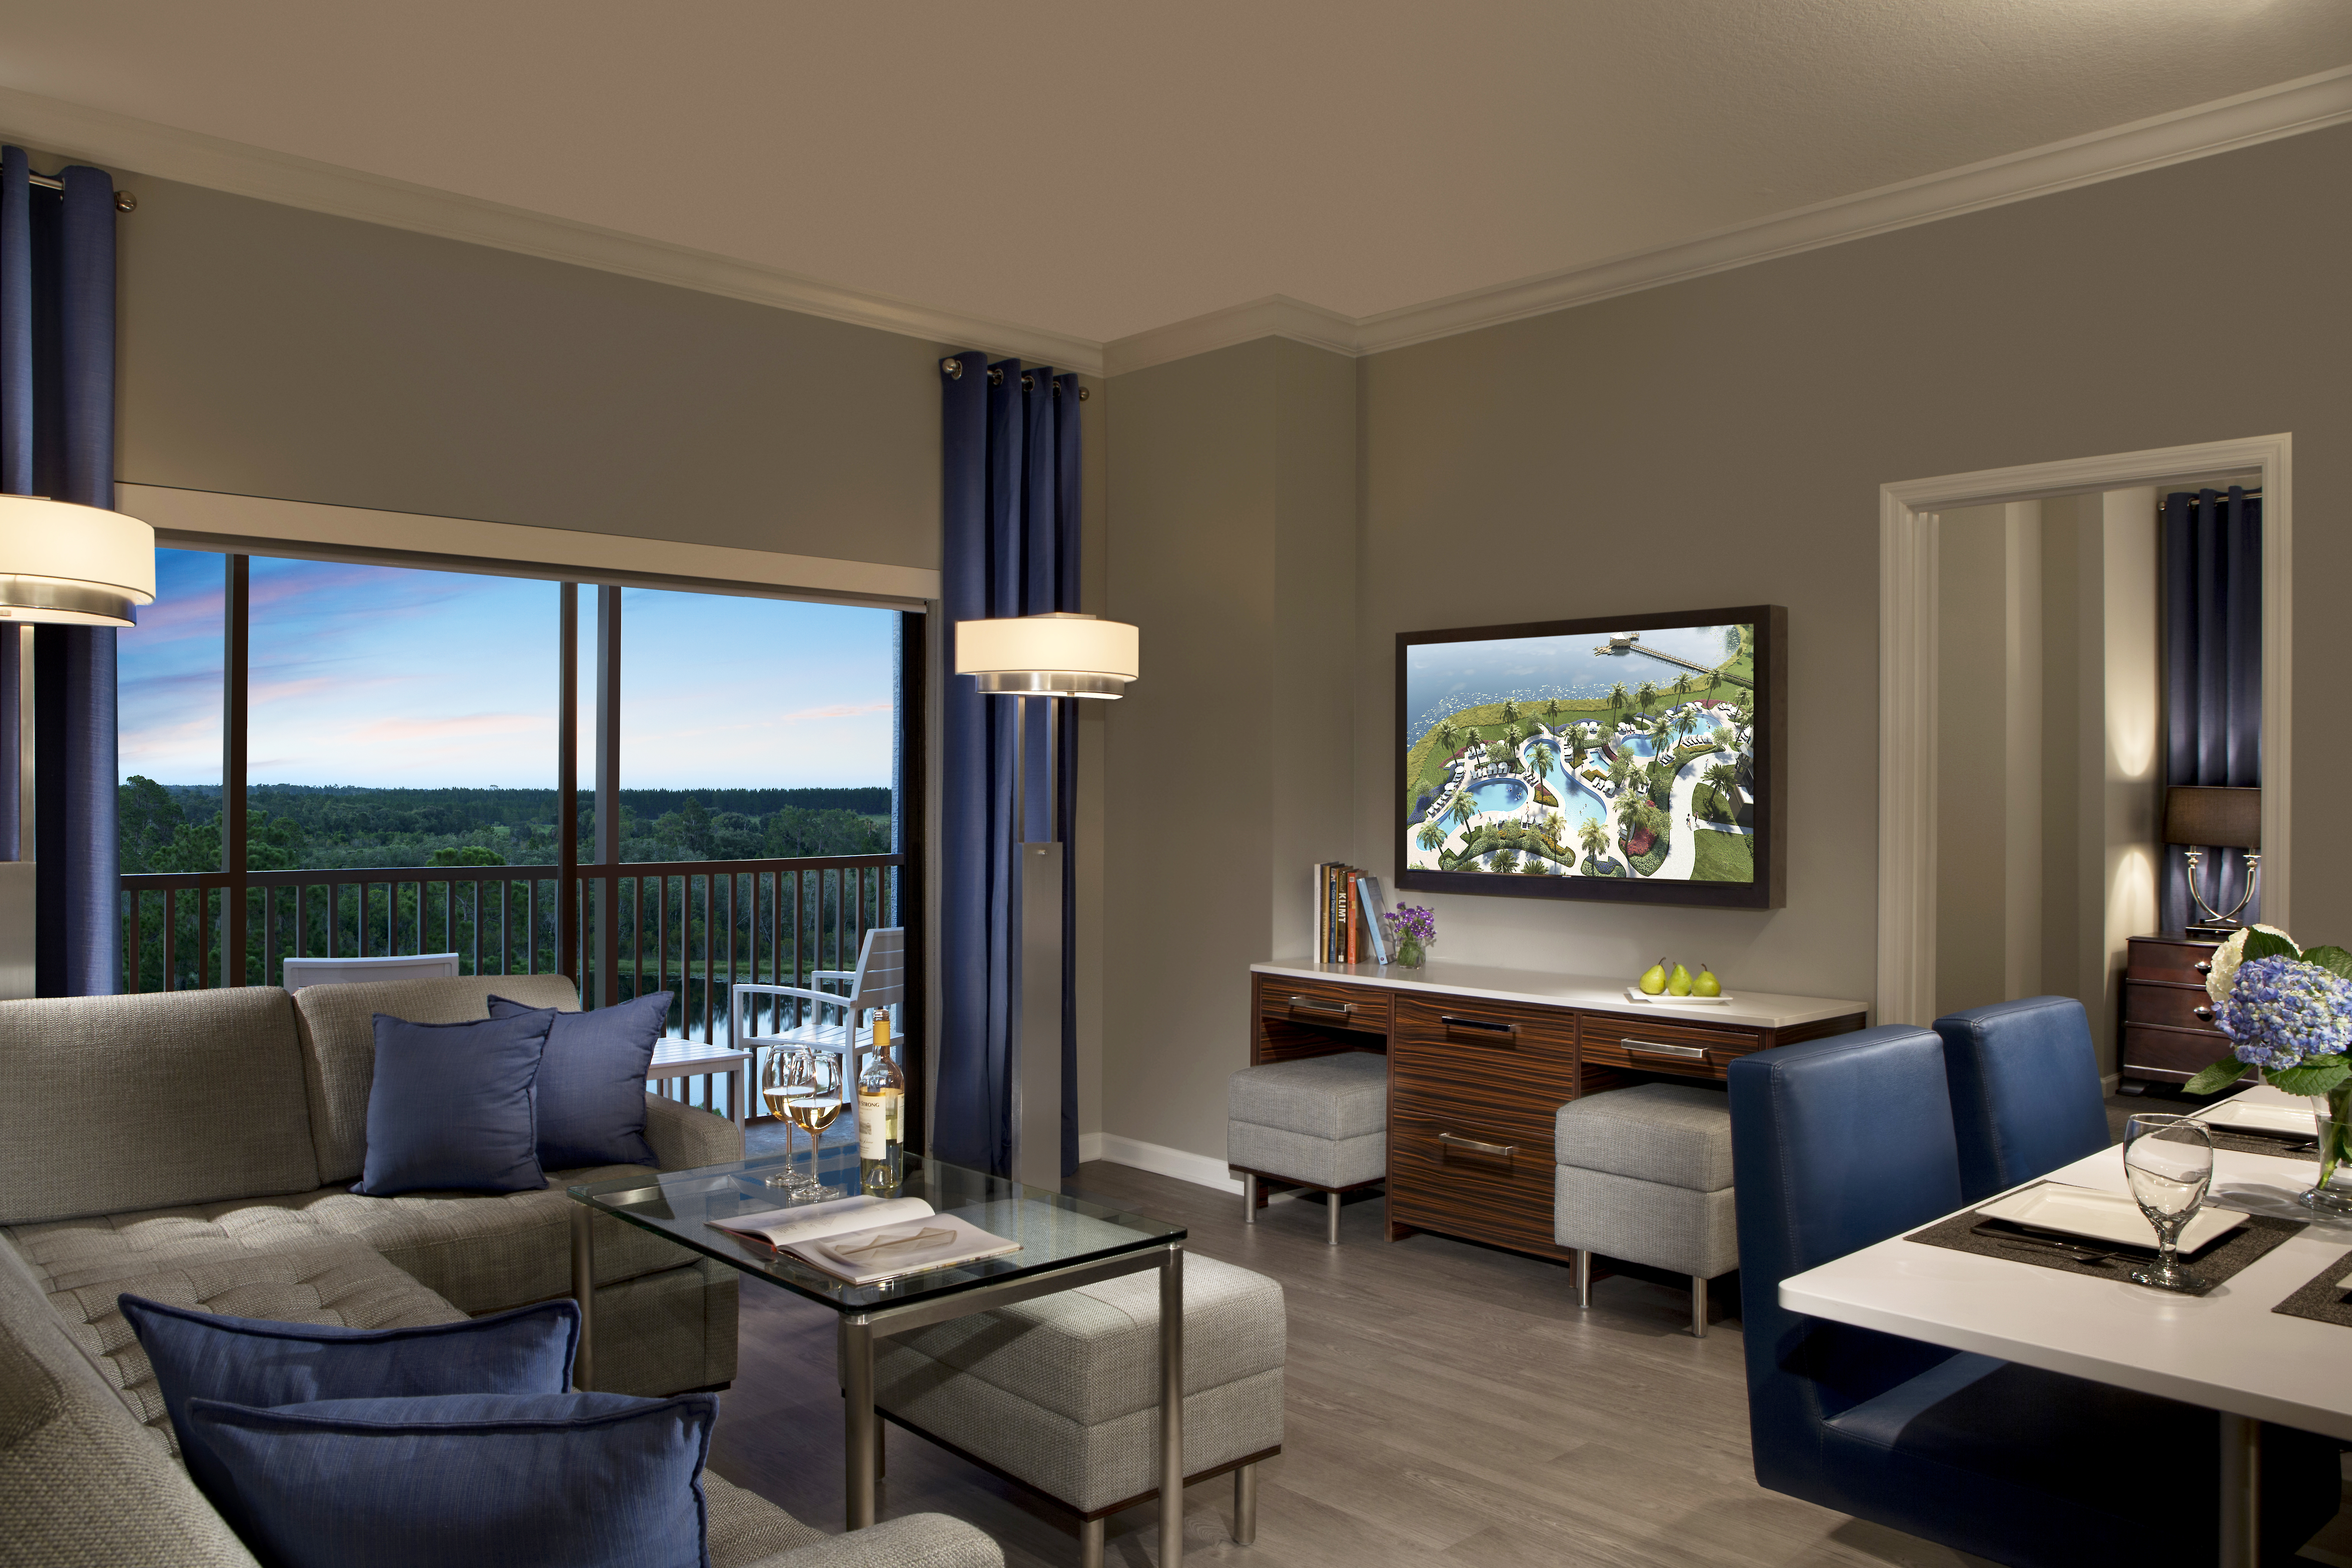 Fully Furnished Condo's Minutes from Disney Parks